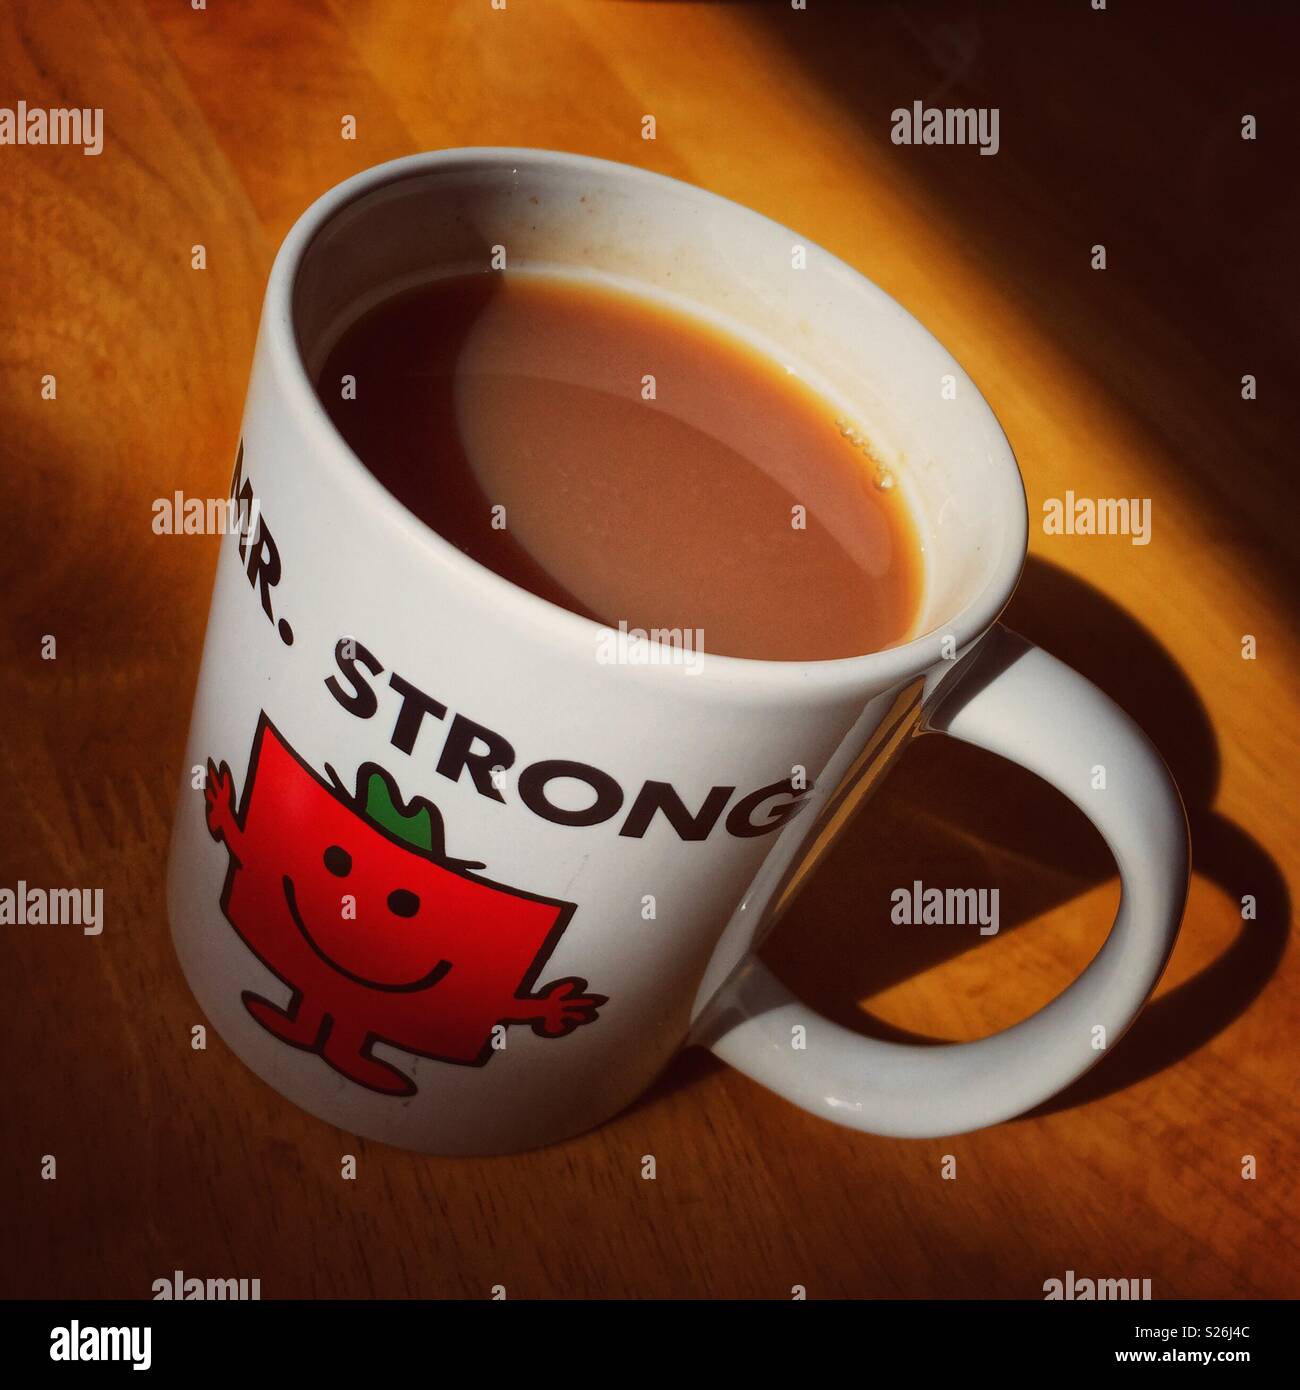 A strong cup of tea. Stock Photo